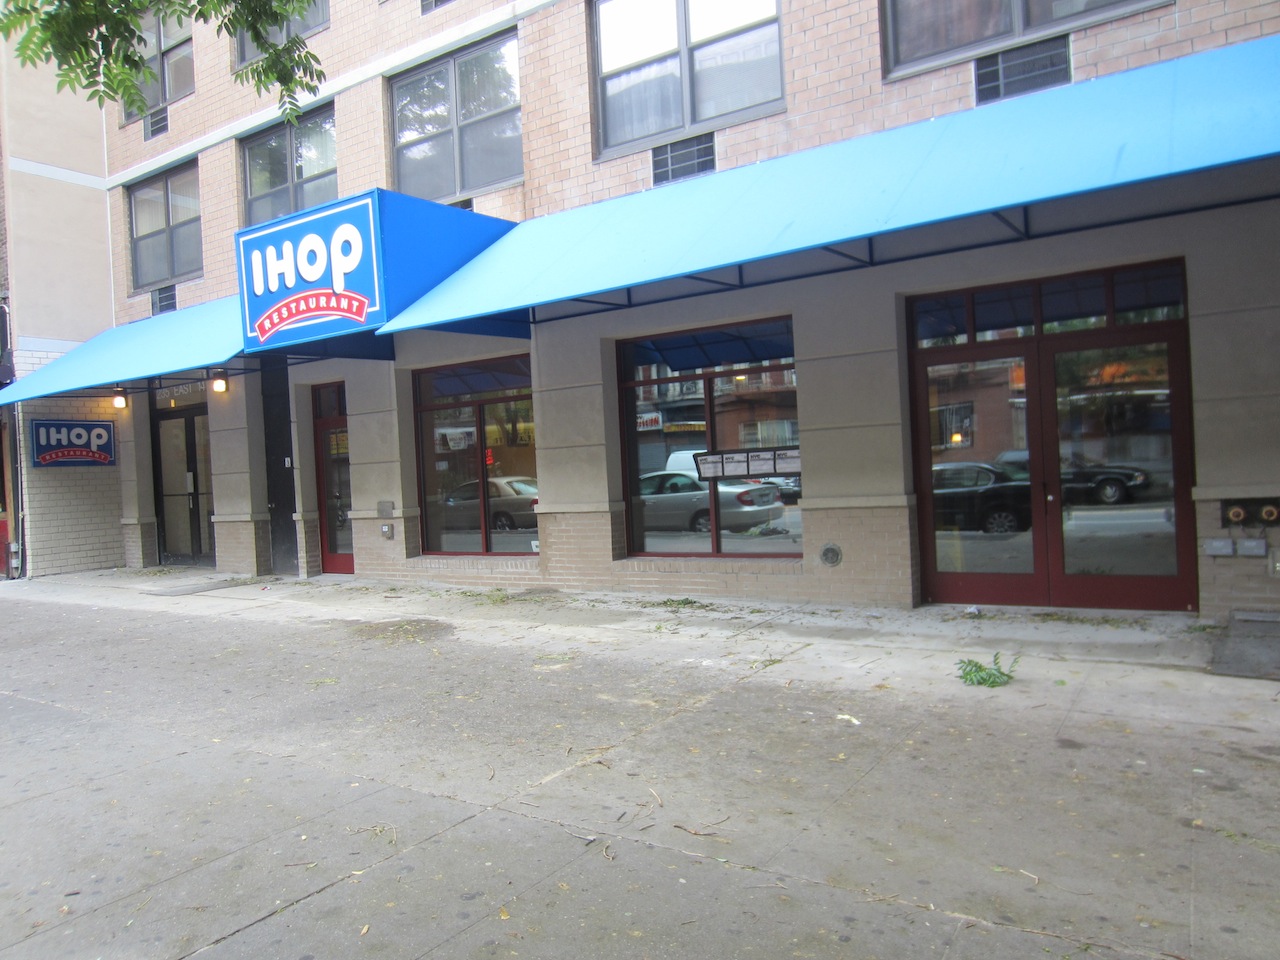 EV Grieve: Life behind IHOP: 'My apartment now smells like the